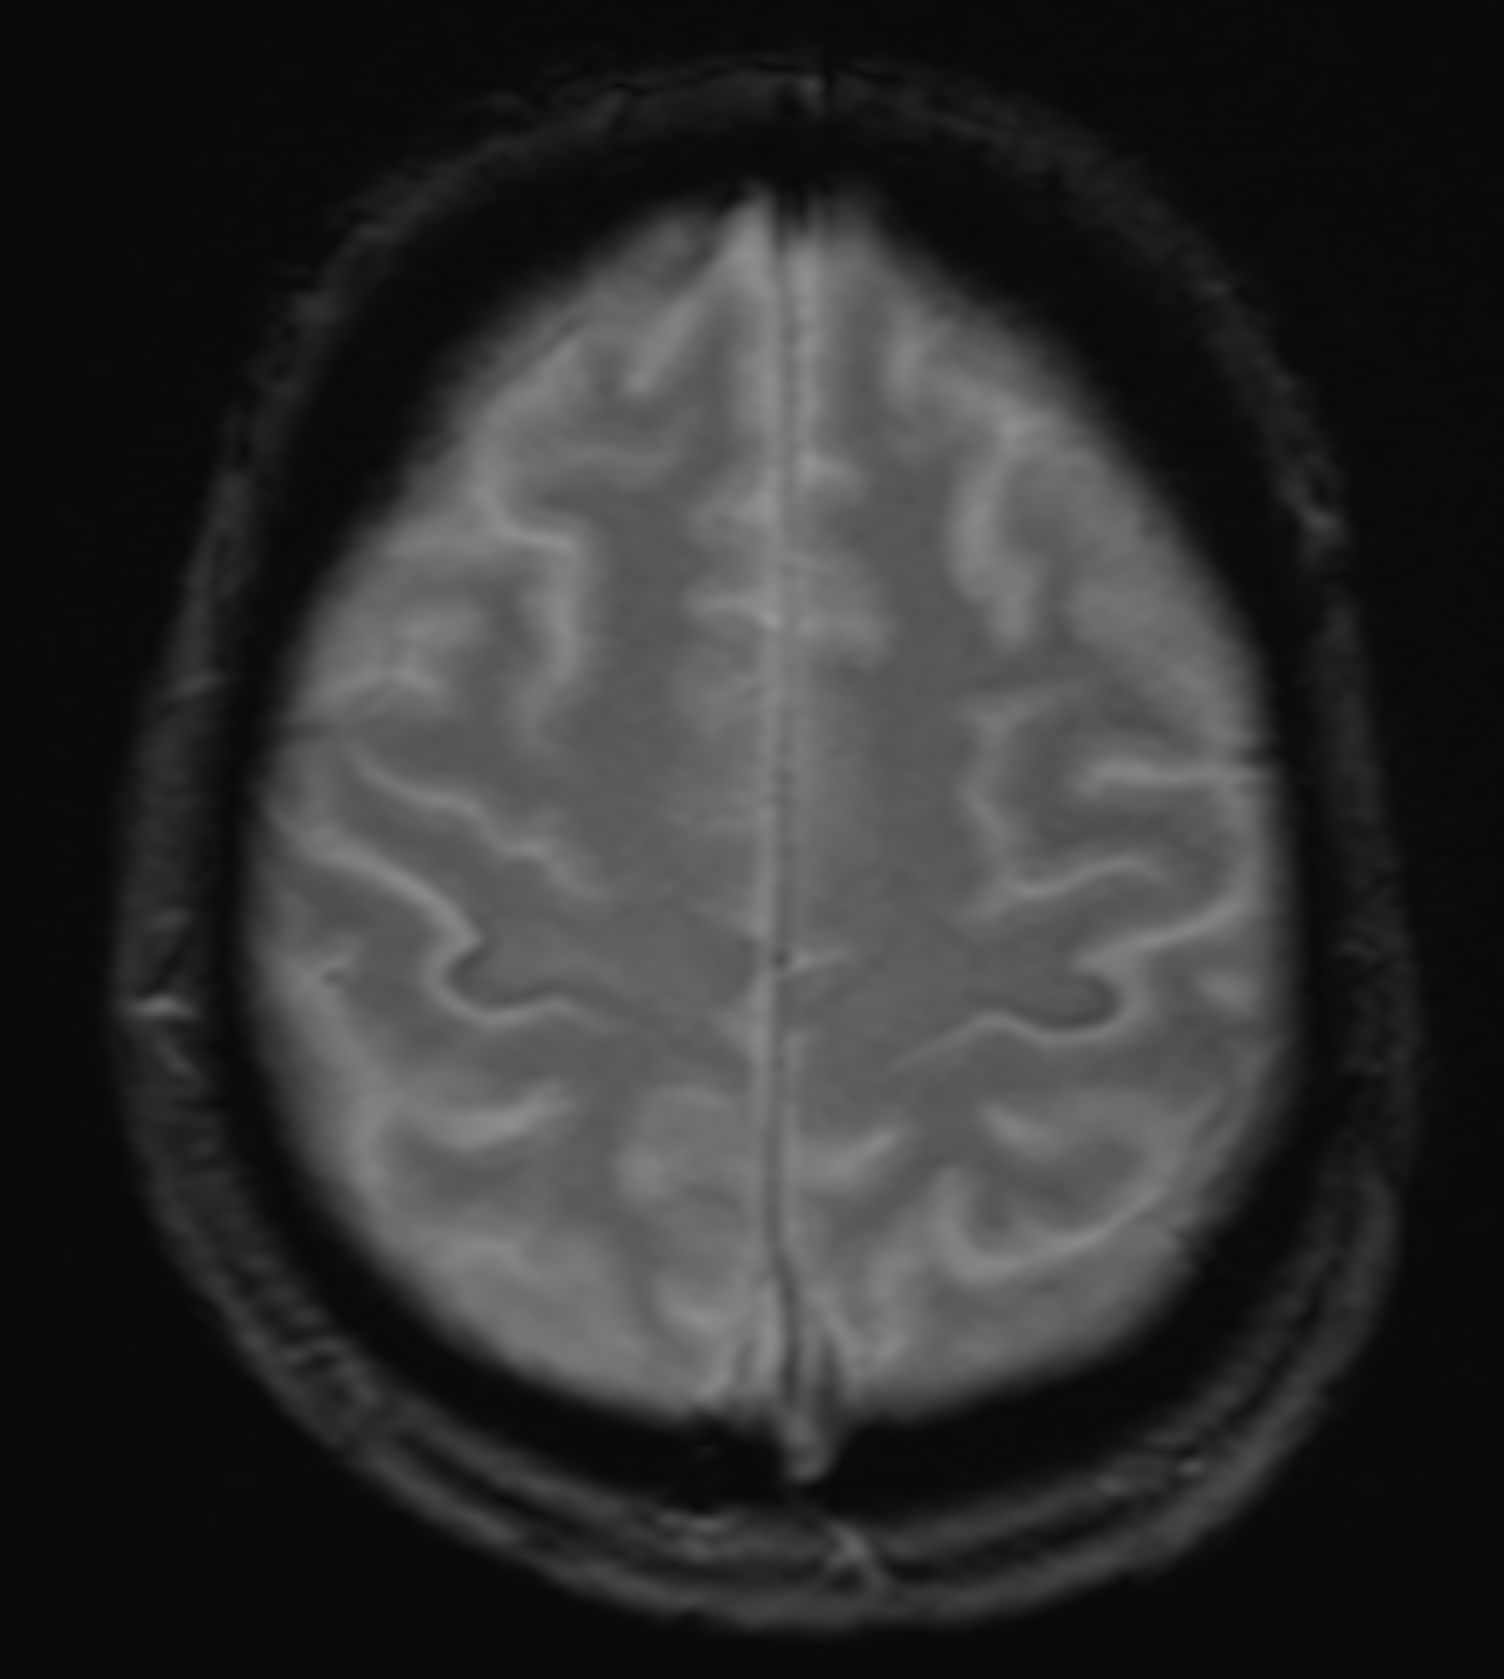 MRI GRE sequence demonstrating iron deposition in the precentral gyrus (motor band sign) in a patient with amyotrophic lateral sclerosis